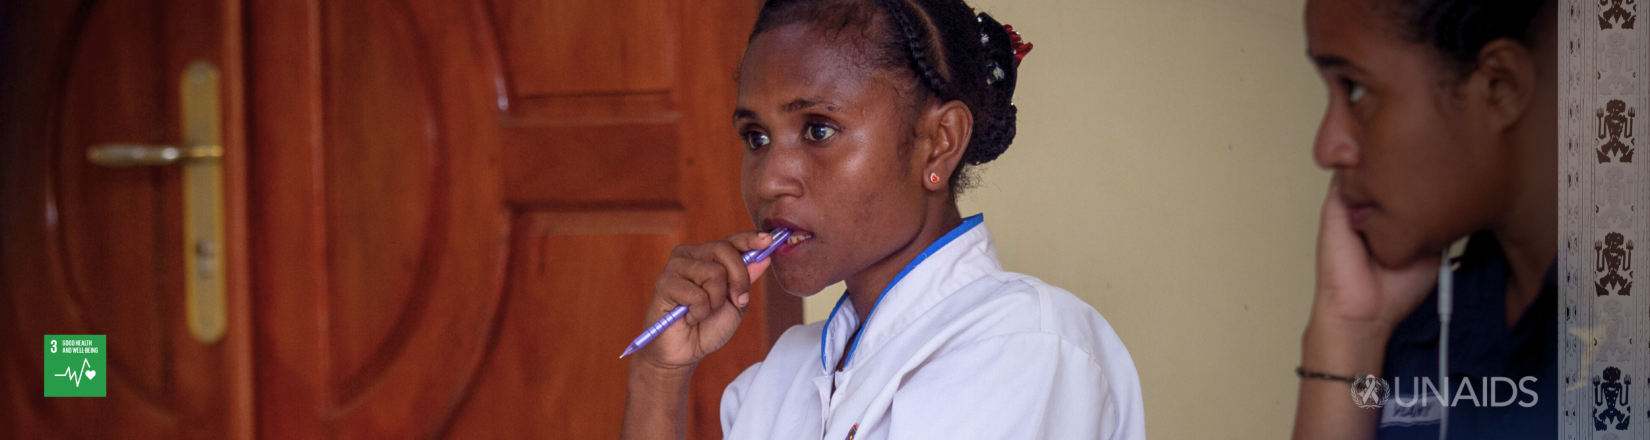 Breaking the Taboo: Health Workers in Papua Explore New Outreach Methods to Promote Youth HIV Testing